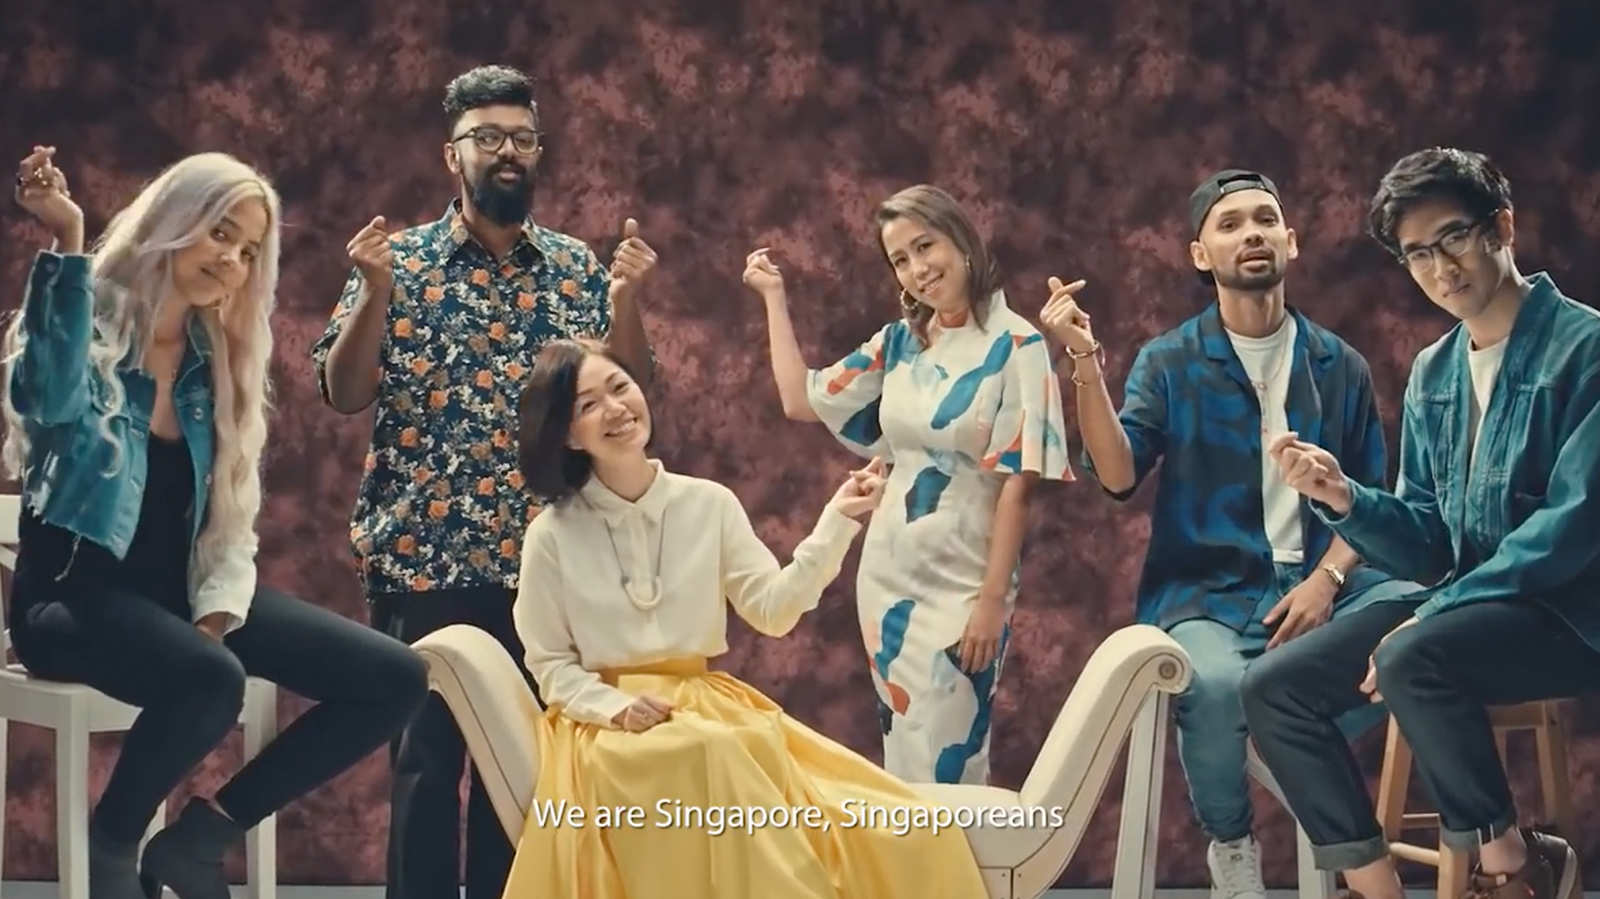 1987’s “We are Singapore” gets a remake. So what does it mean to be Singaporean today?